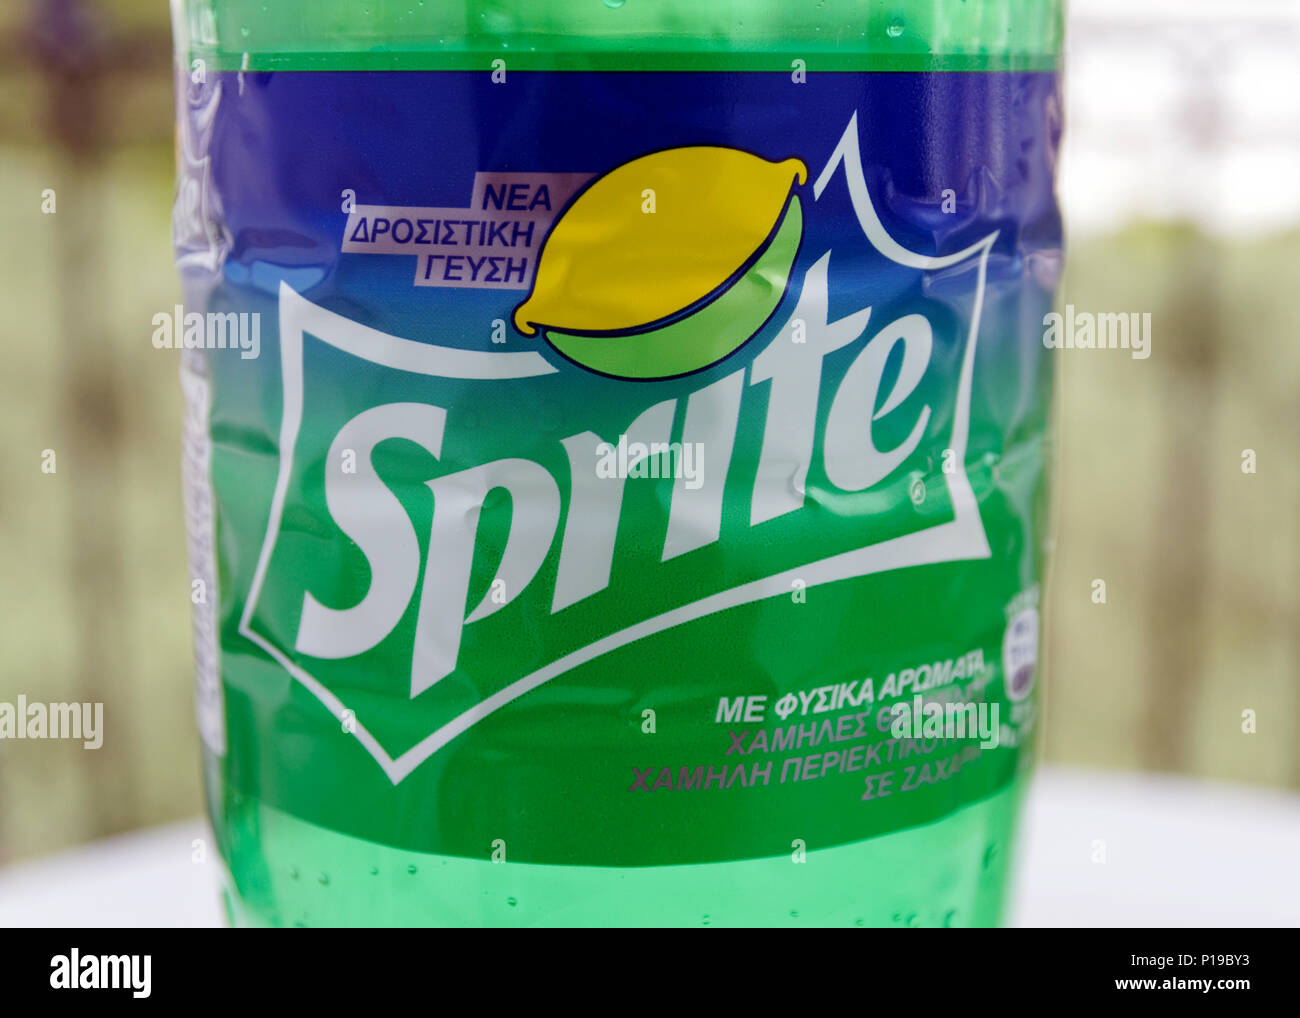 Bottle of Sprite with label in Greek. Stock Photo